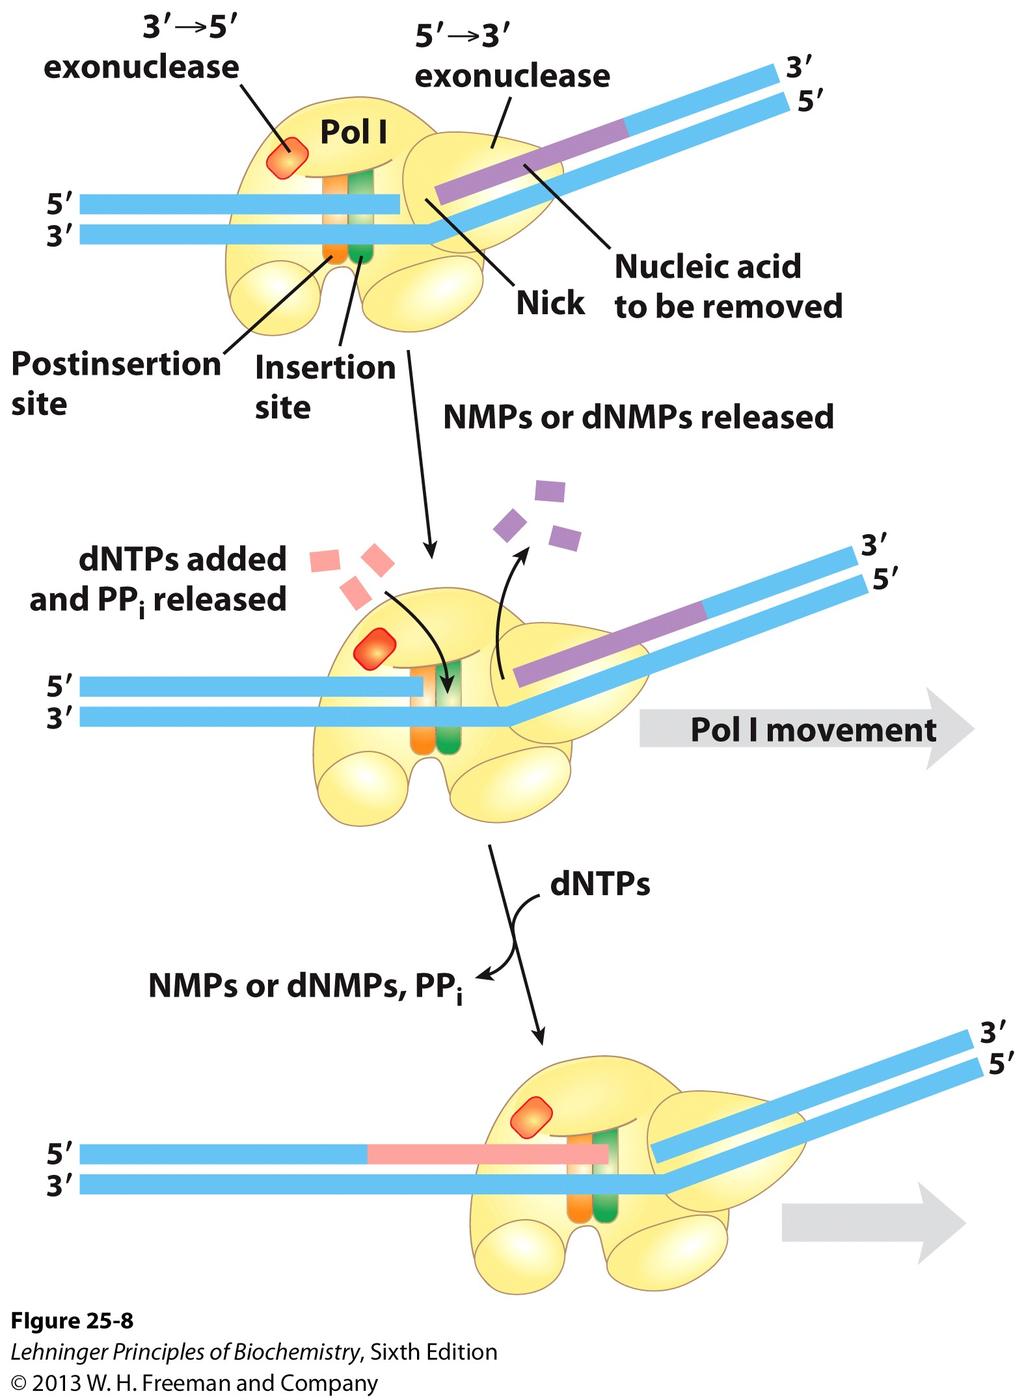 Elongation: Removal of RNA primers by Pol I! DNA ligase: sealing the nick! Phosphodiester bond formation! ➀ adenylylation of enzyme! ➁ activation of 5ʹ phosphate! ➂ nucleophilic attack by 3ʹ OH!